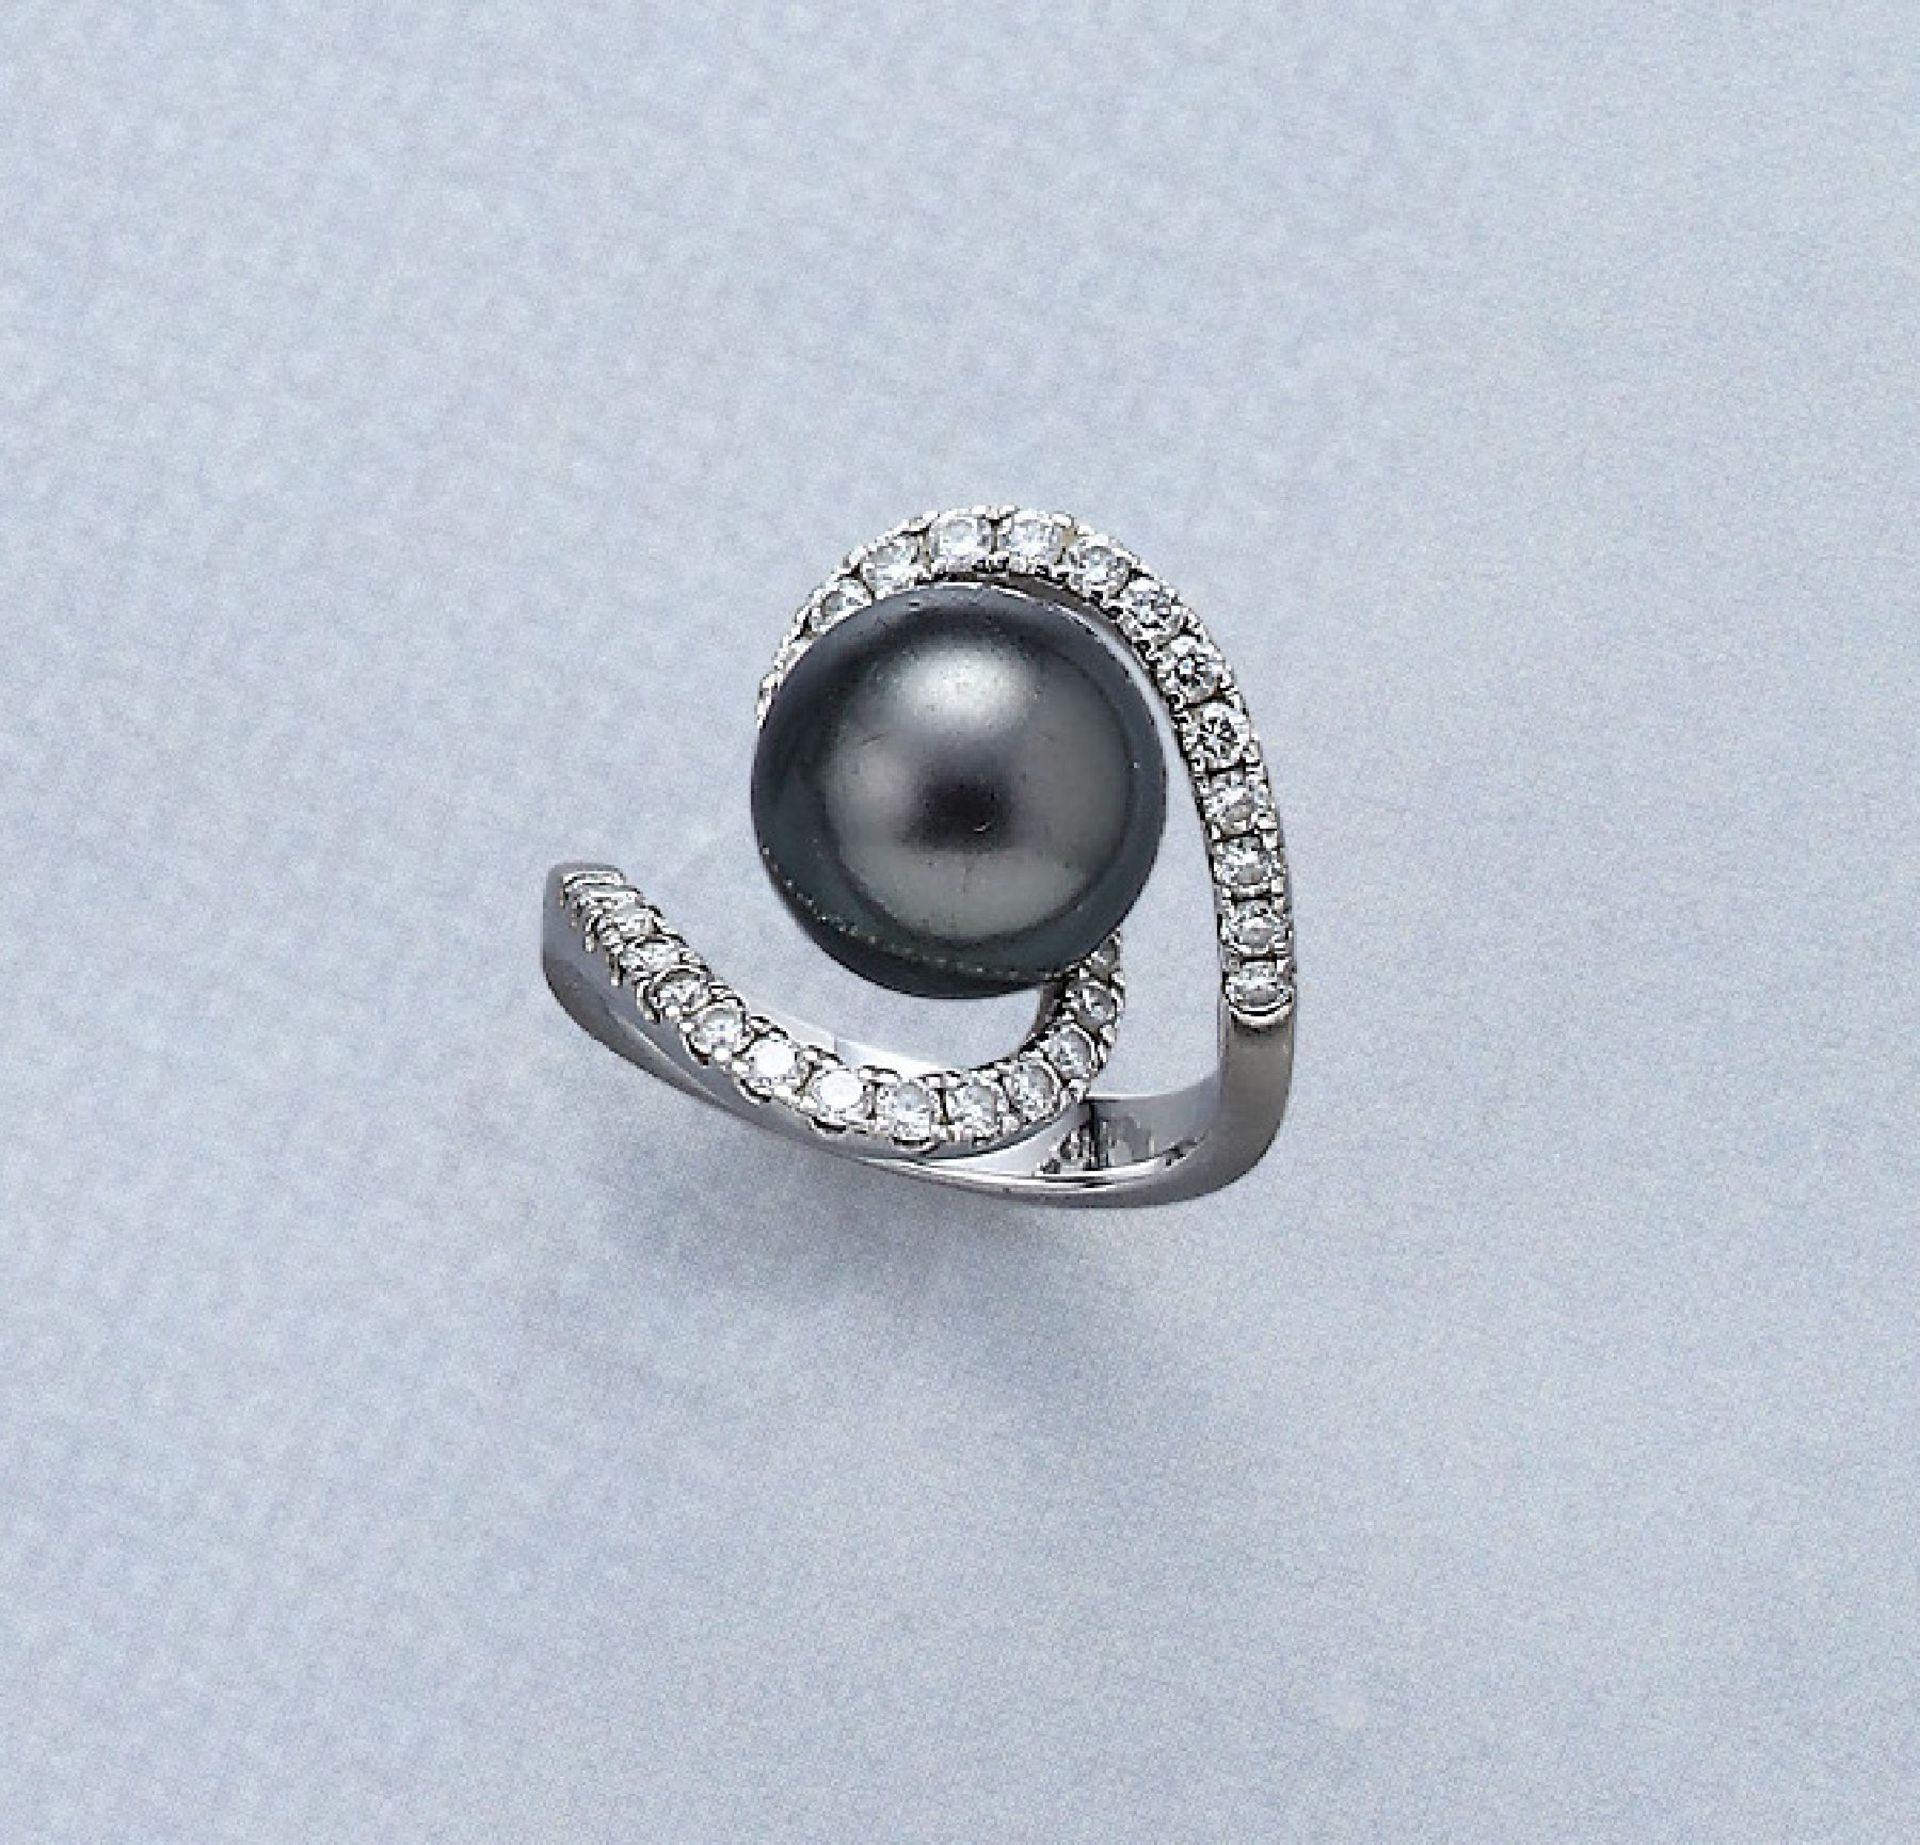 18 kt gold SCHÖFFEL ring with cultured tahitian pearl and brilliants , WG 750/000, dark grey